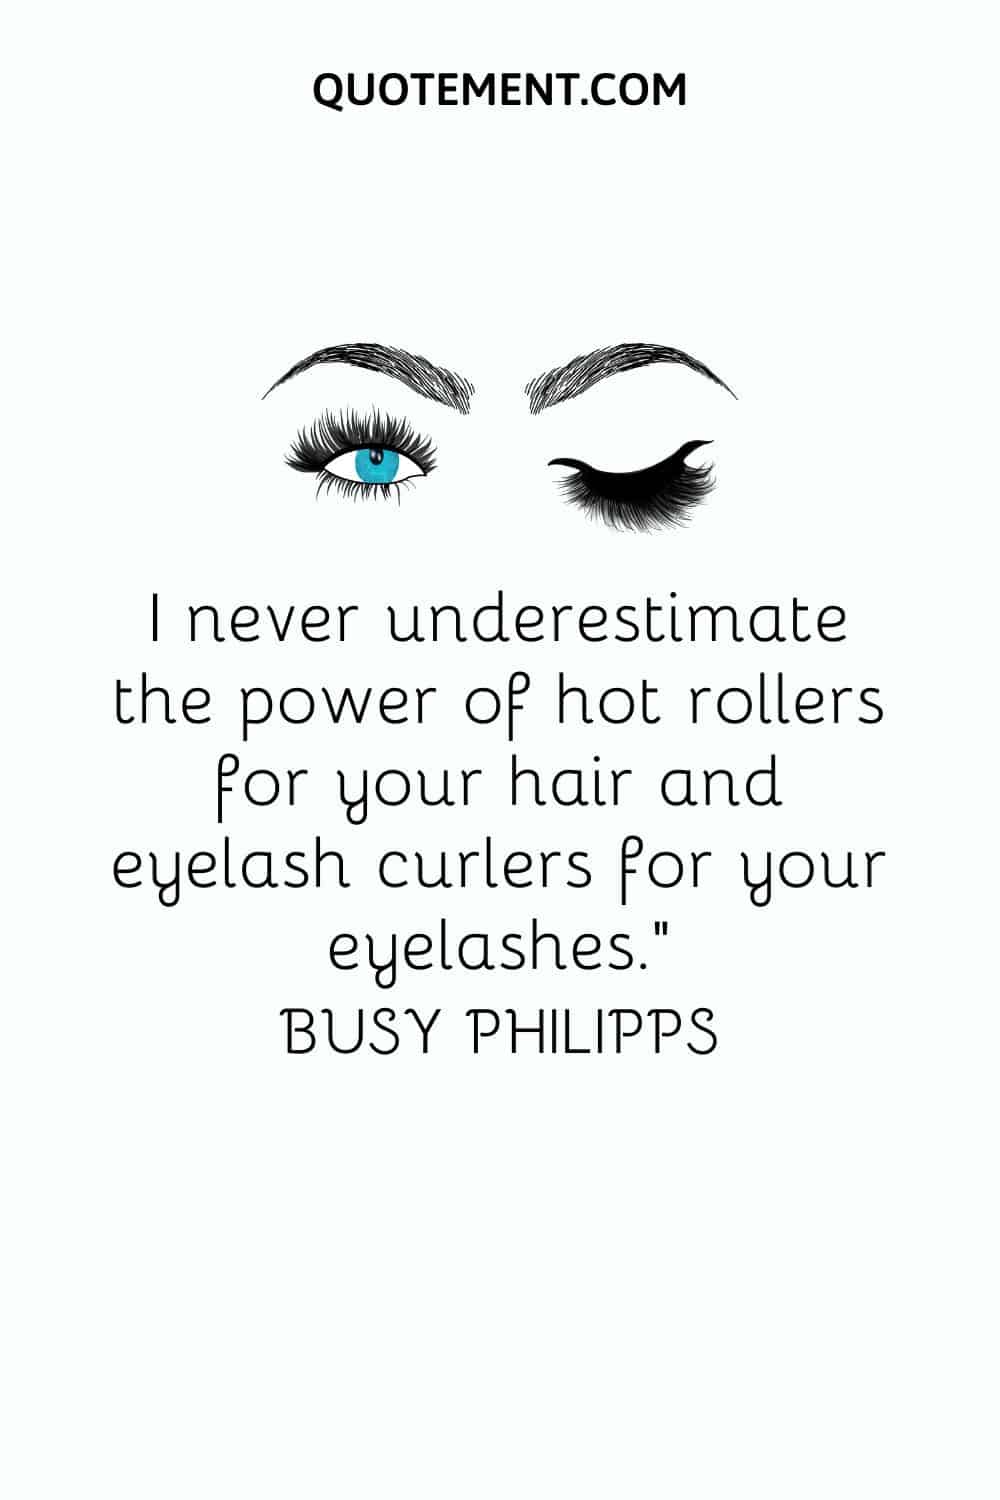 I never underestimate the power of hot rollers for your hair and eyelash curlers for your eyelashes